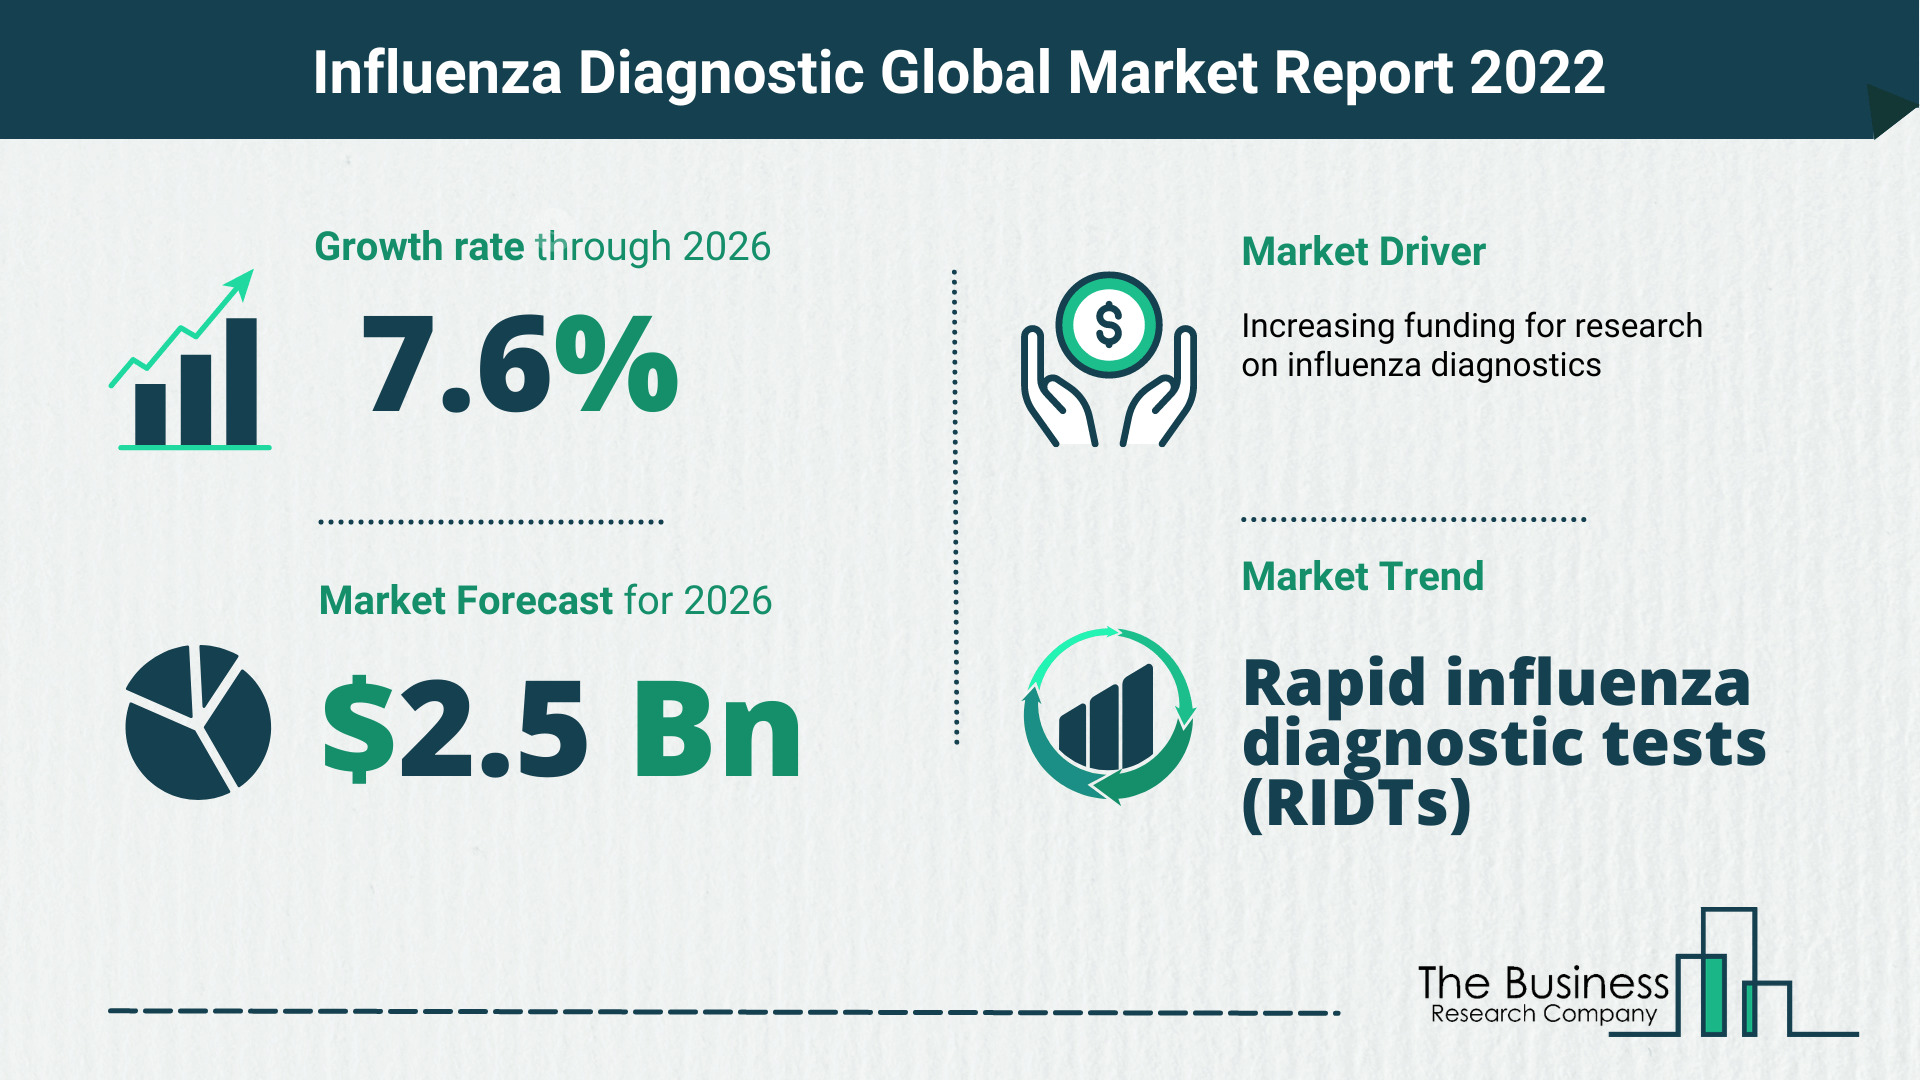 Latest Influenza Diagnostic Market Growth Study 2022-2026 By The Business Research Company